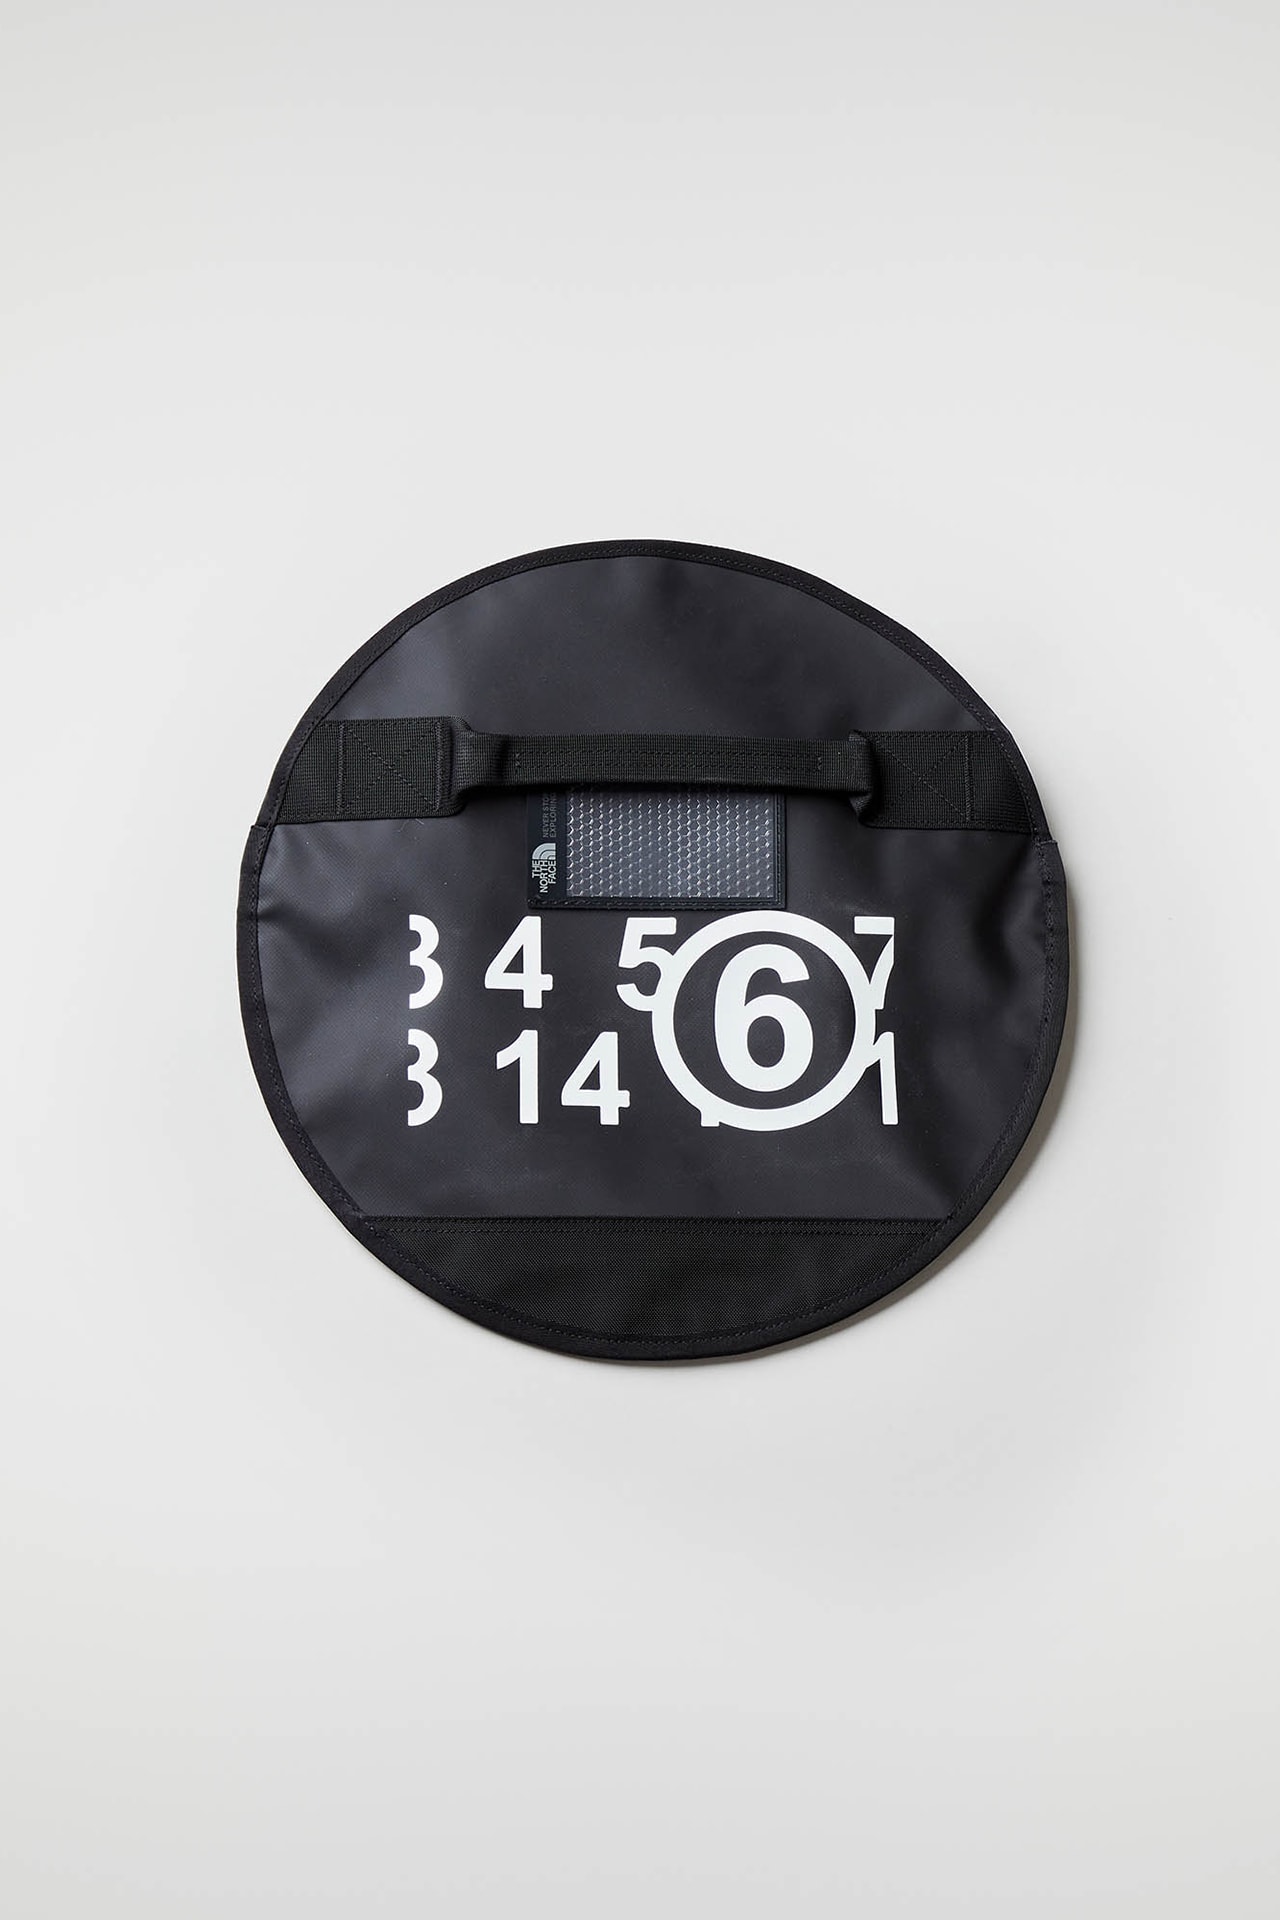 MM6 Maison Margiela The North Face Collaboration Fall Winter 2020 Circle Clutch Black